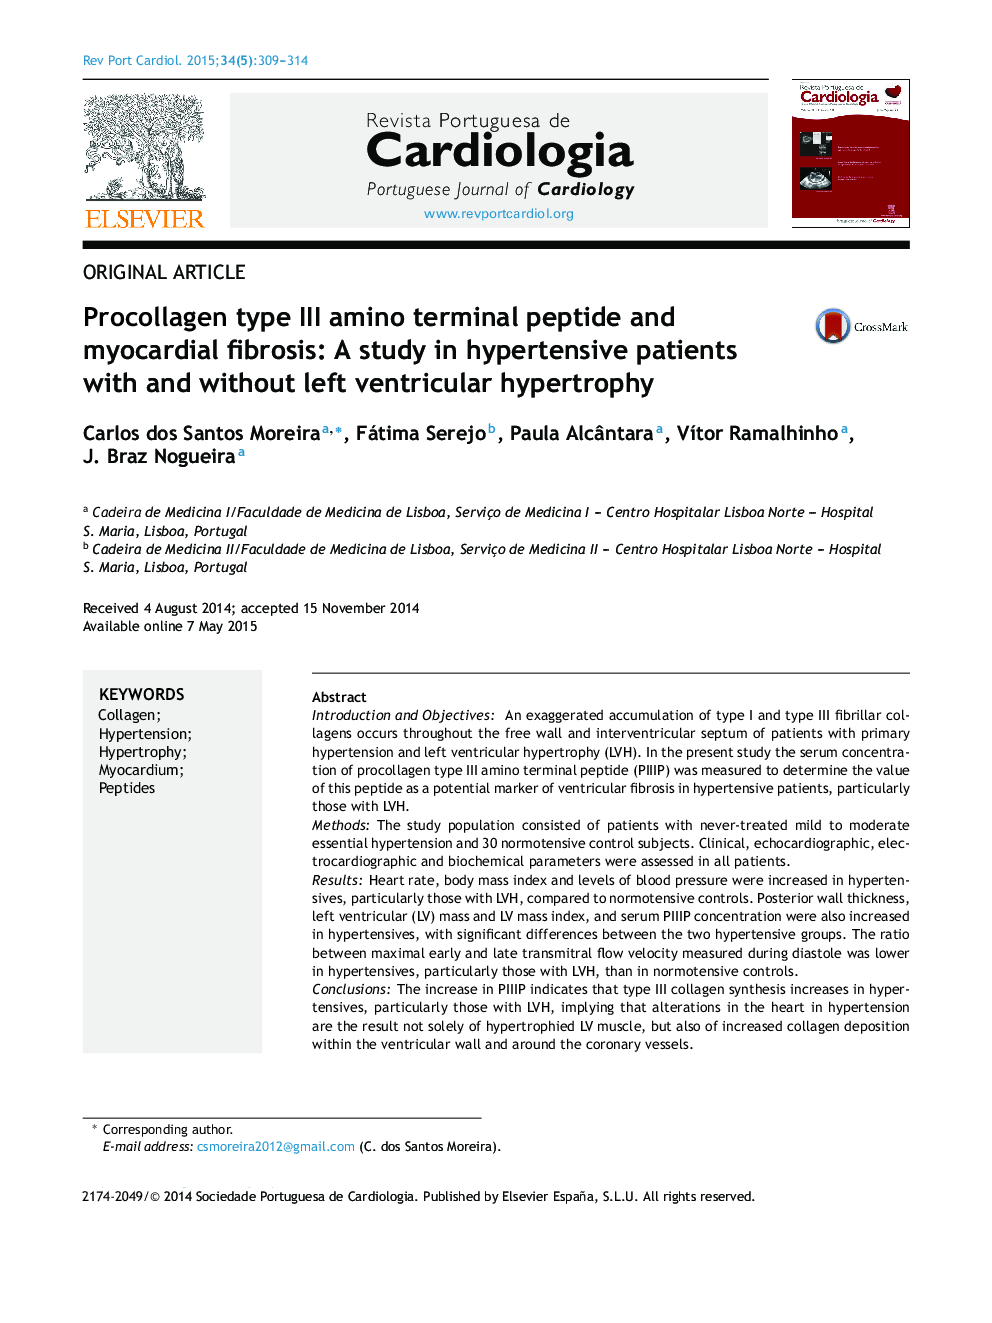 Procollagen type III amino terminal peptide and myocardial fibrosis: A study in hypertensive patients with and without left ventricular hypertrophy